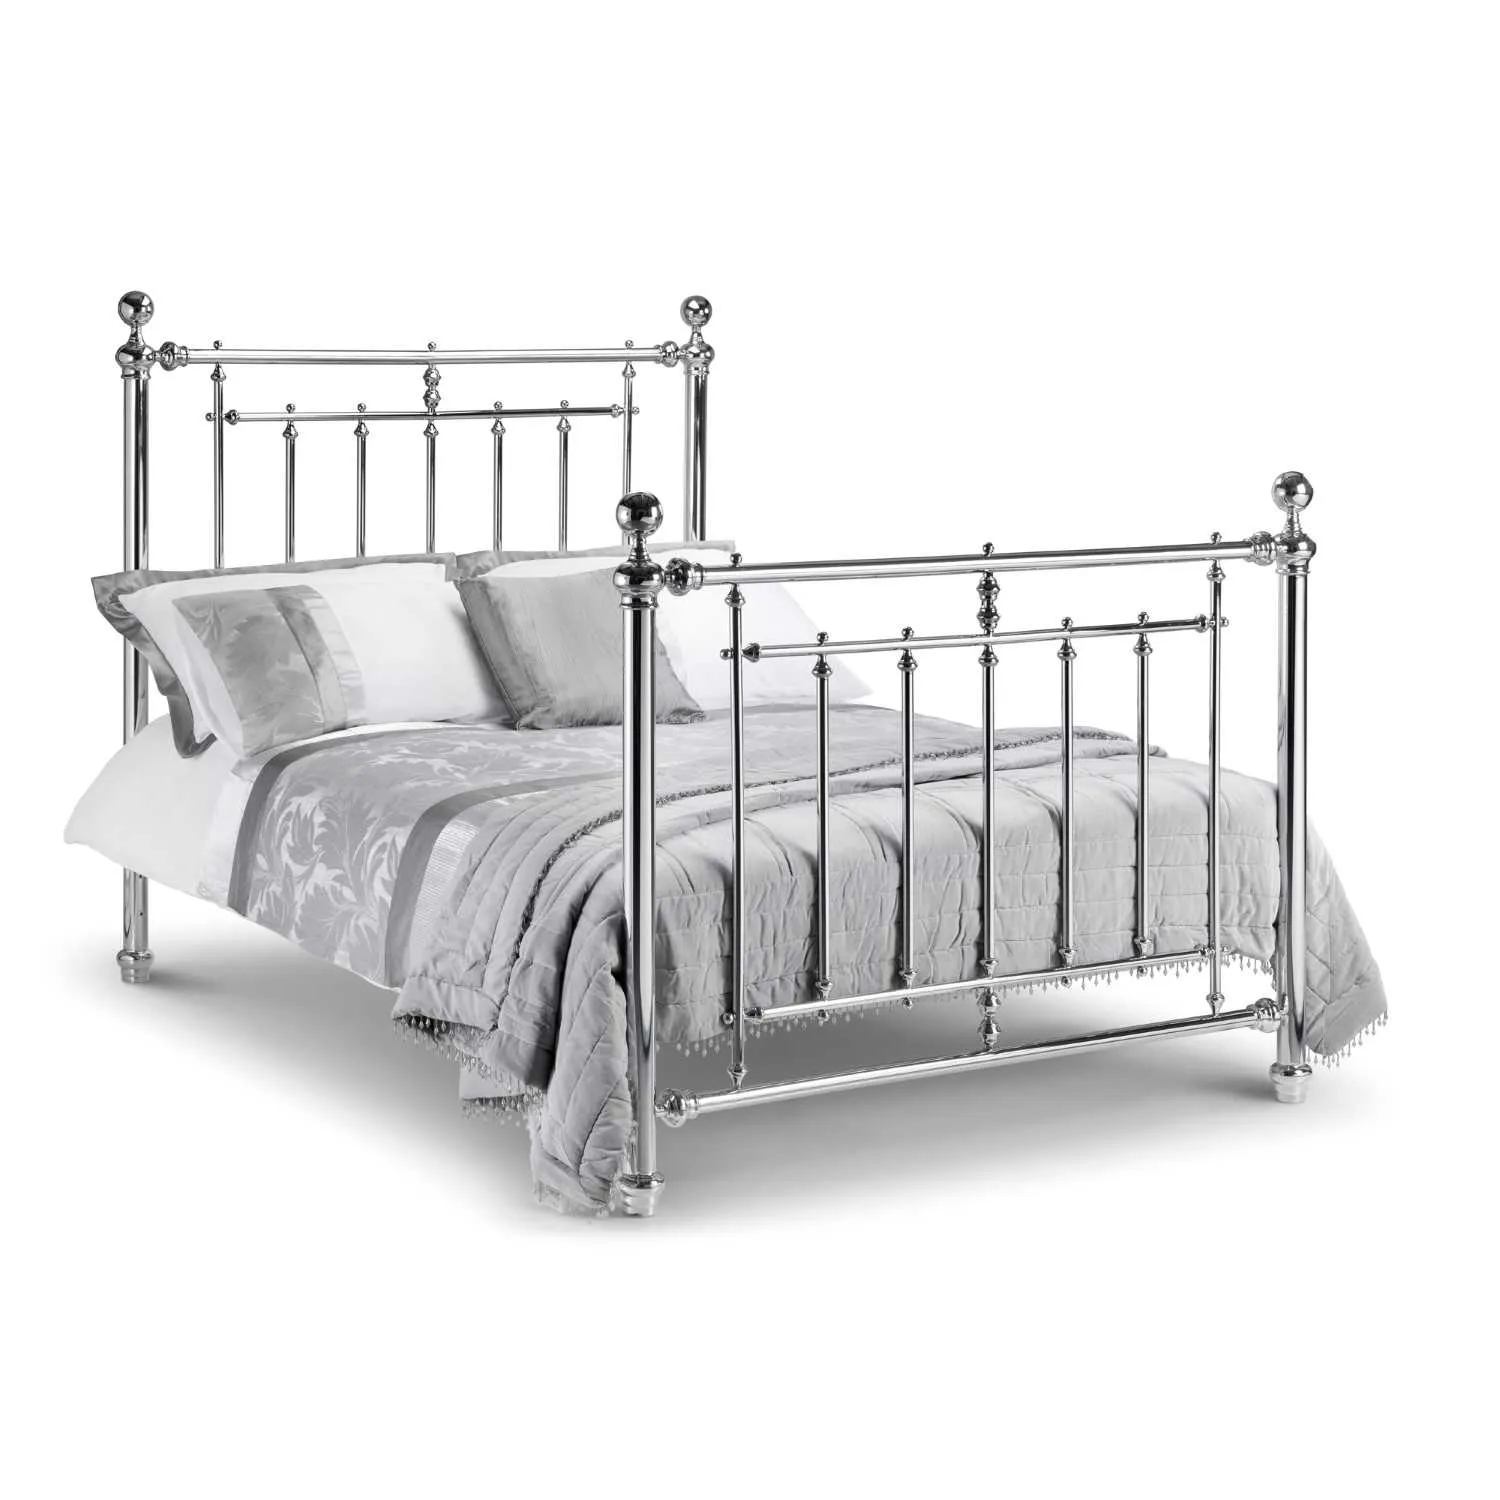 Chrome Plated Finish Metal Bed Frame 135cm 4ft6in Double High Foot End Traditional